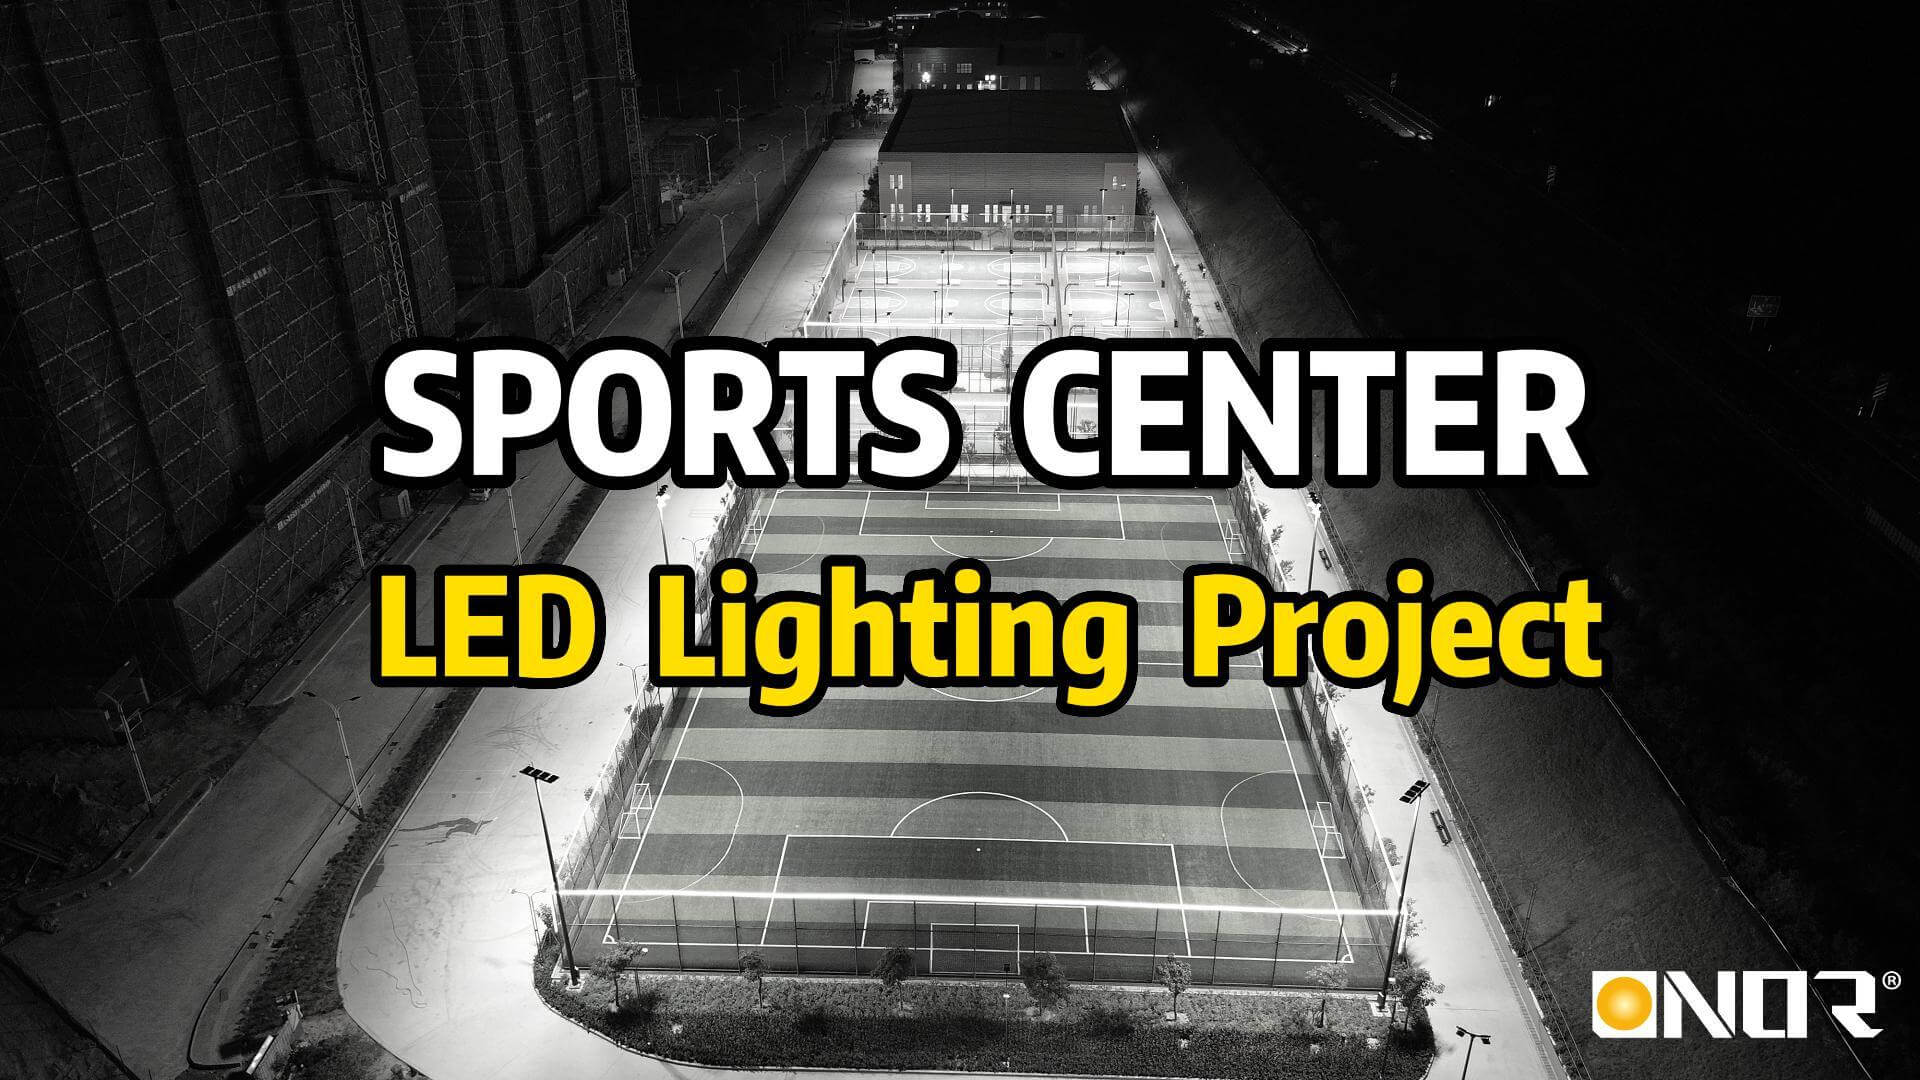 New Sports Center LED Lighting Project